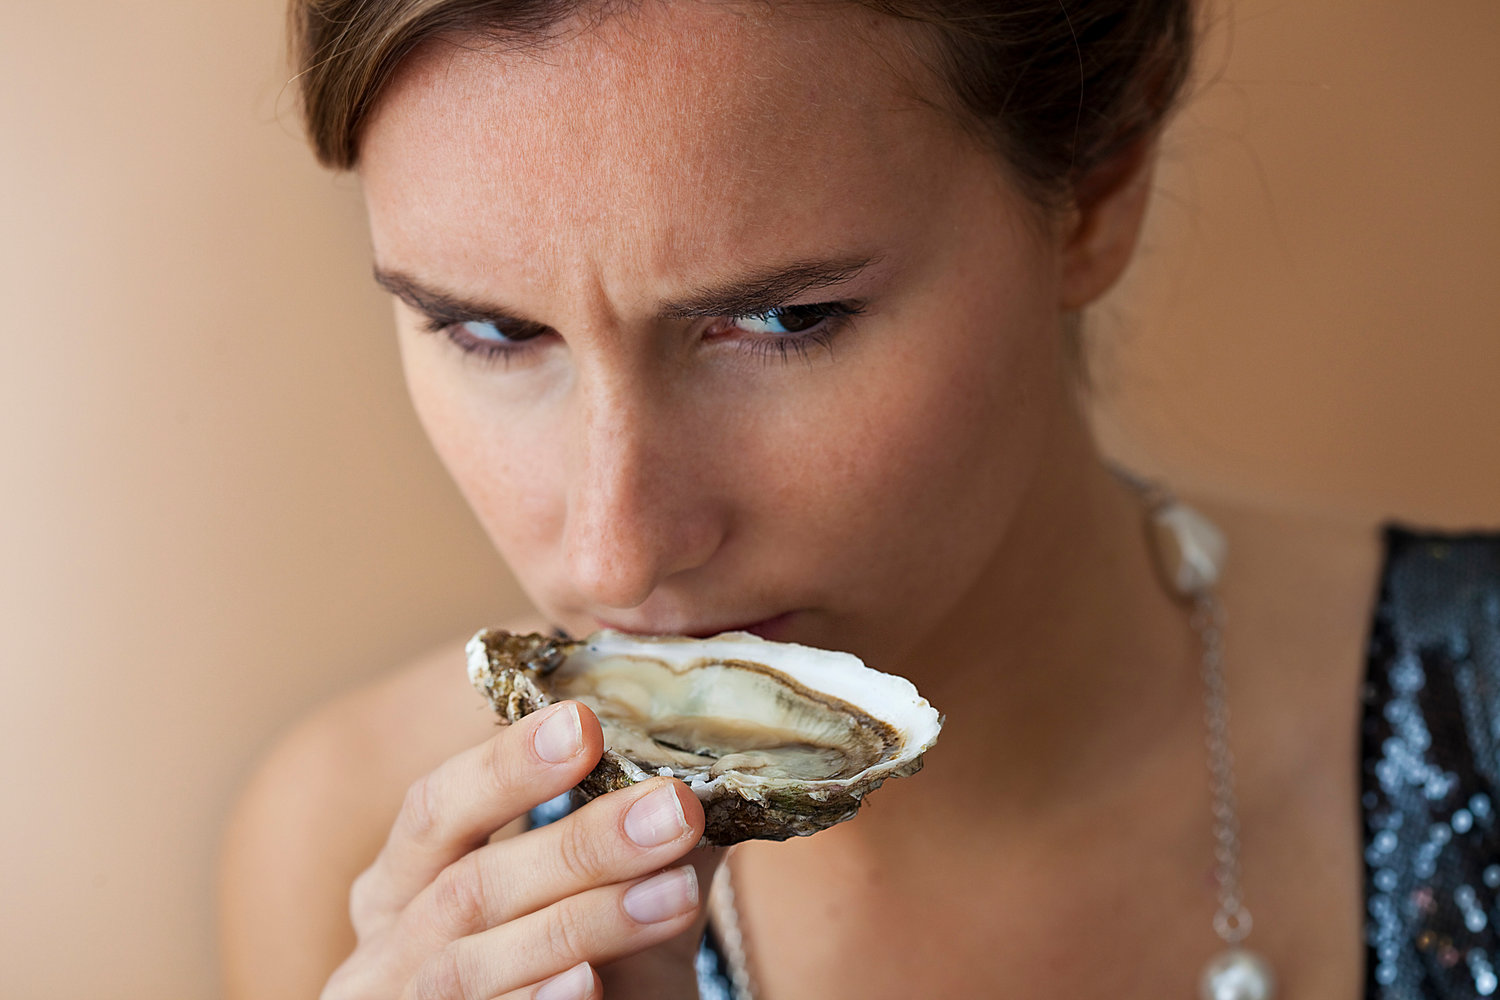 Avoid eating certain oysters until further notice, says the Washington State Department of Health, due to a norovirus outbreak linked to raw oysters.